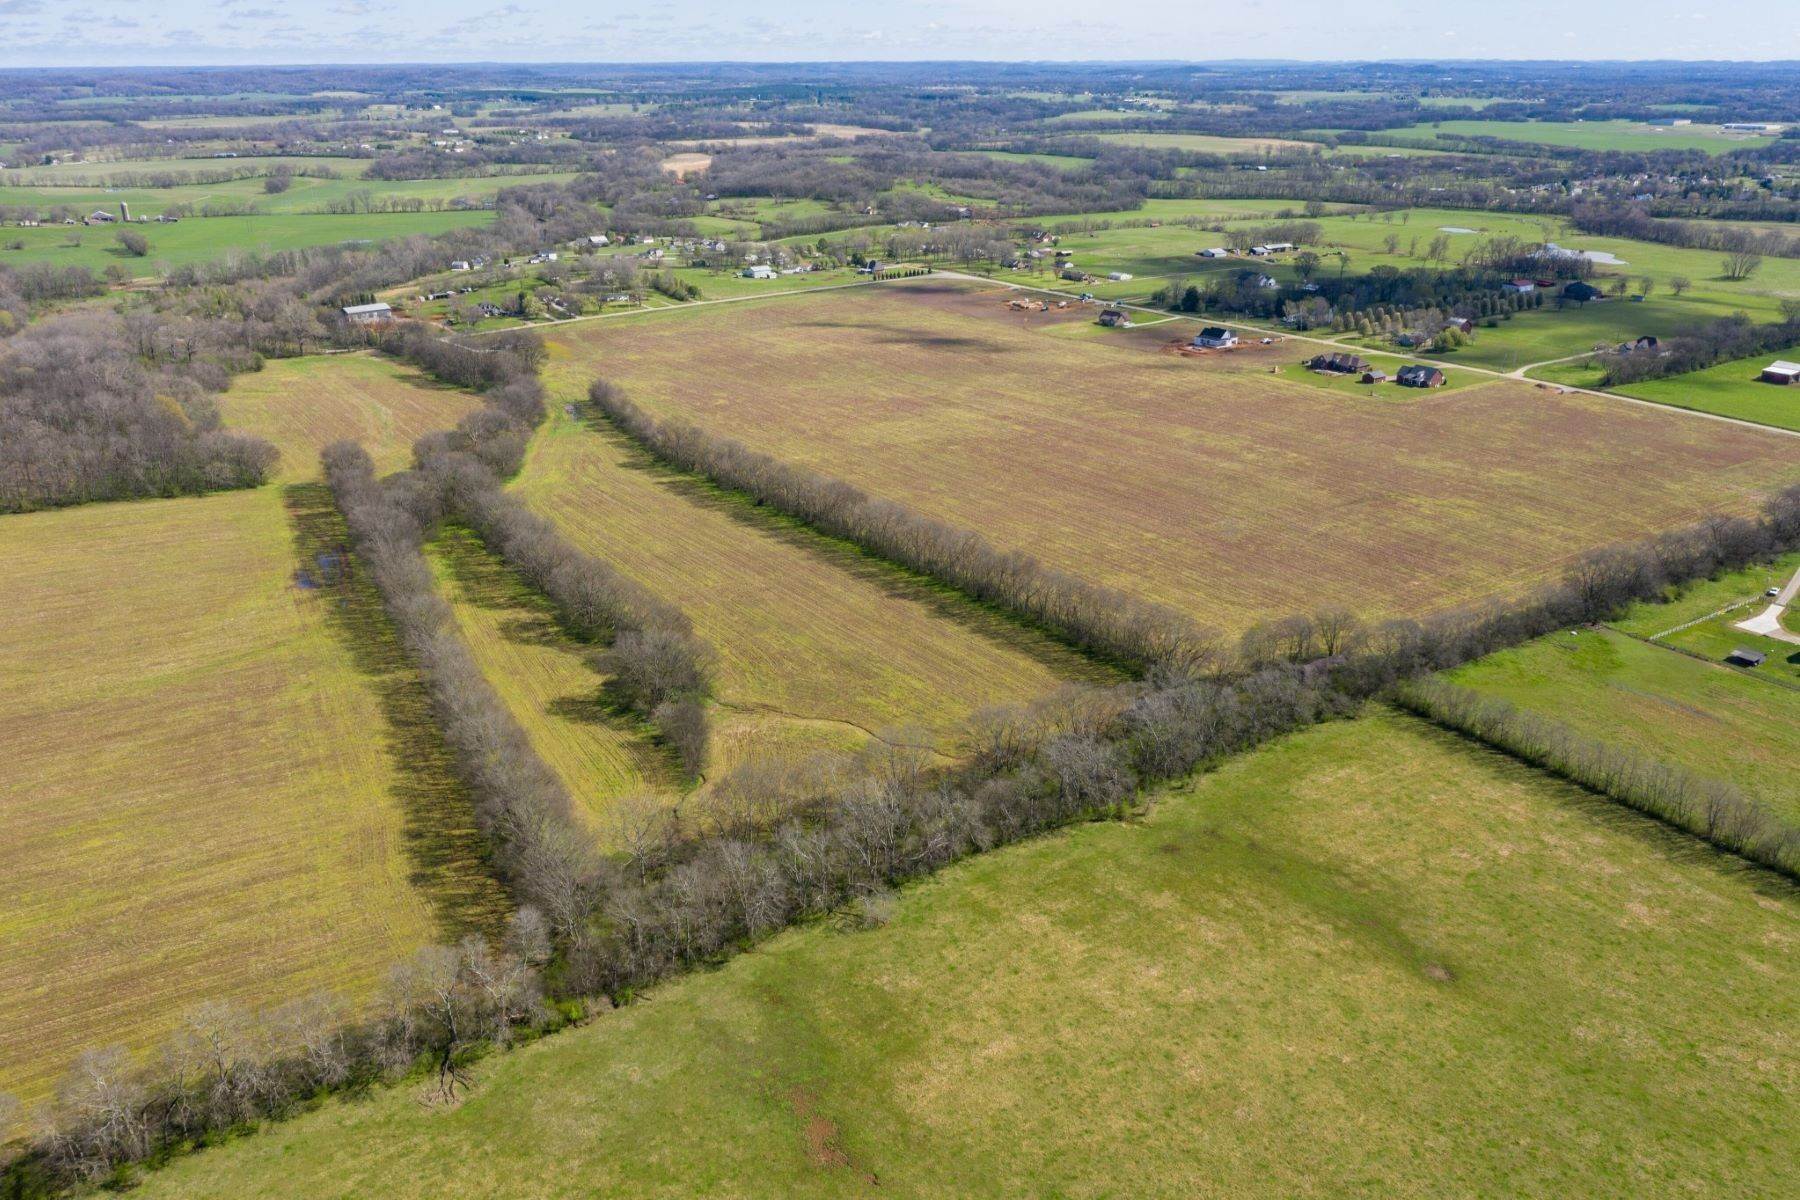 Farm and Ranch Properties for Sale at 0 South Cross Bridges Rd, Mount Pleasant, Tn, 38474 0 South Cross Bridges Rd Mount Pleasant, Tennessee 38474 United States